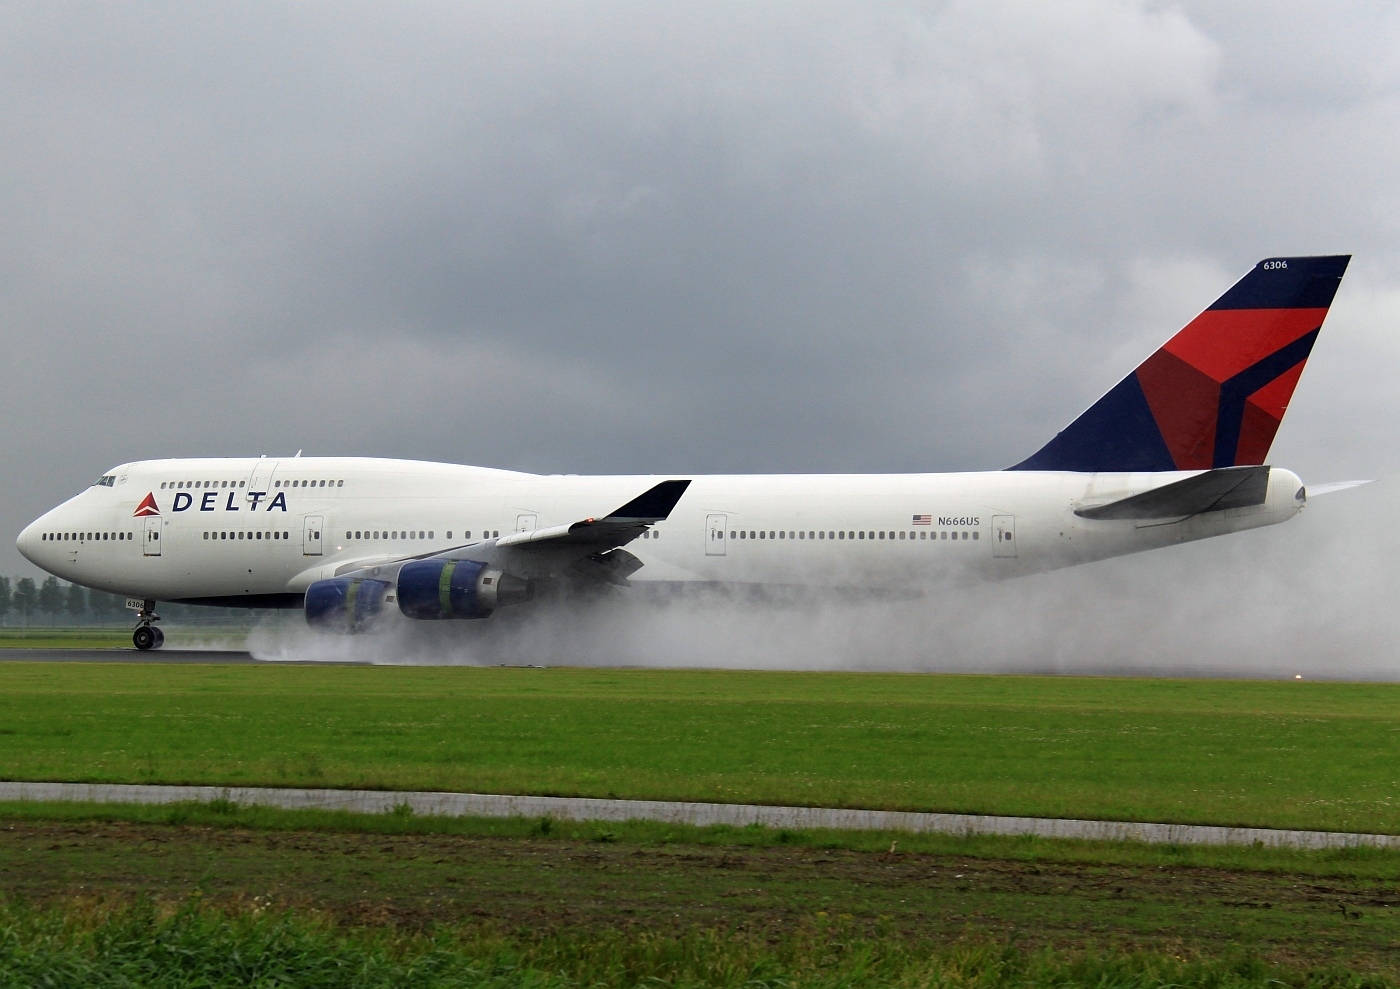 Delta Airlines Airplane Smoke On Grass Field Background